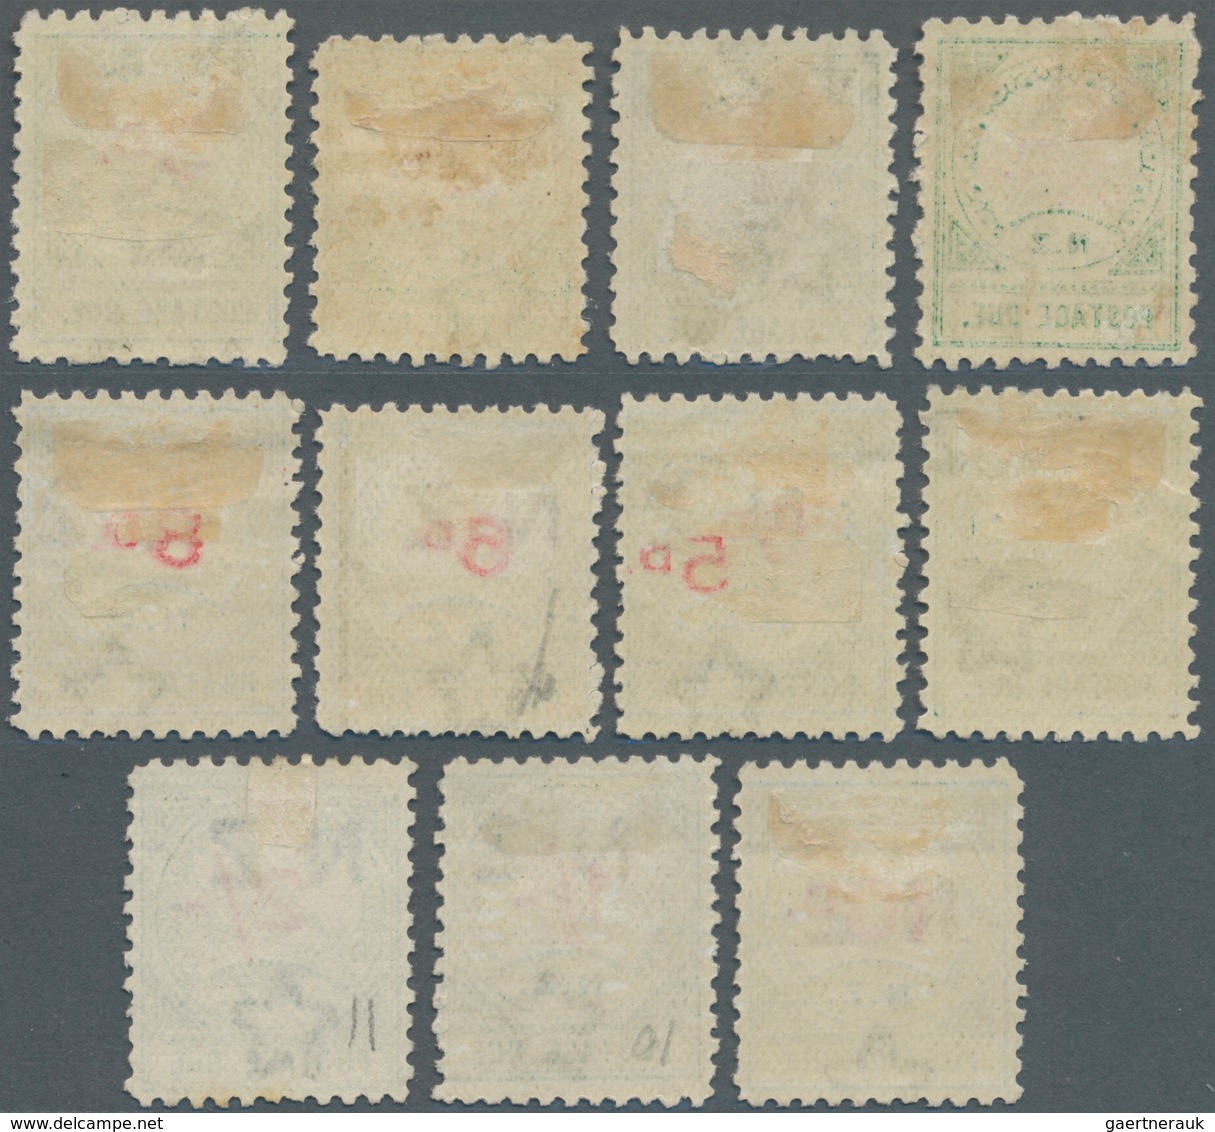 Neuseeland - Portomarken: 1899, Postage Dues Simplified Set Of 11 From ½d. To 2s., Mint Heavy Hinged - Strafport